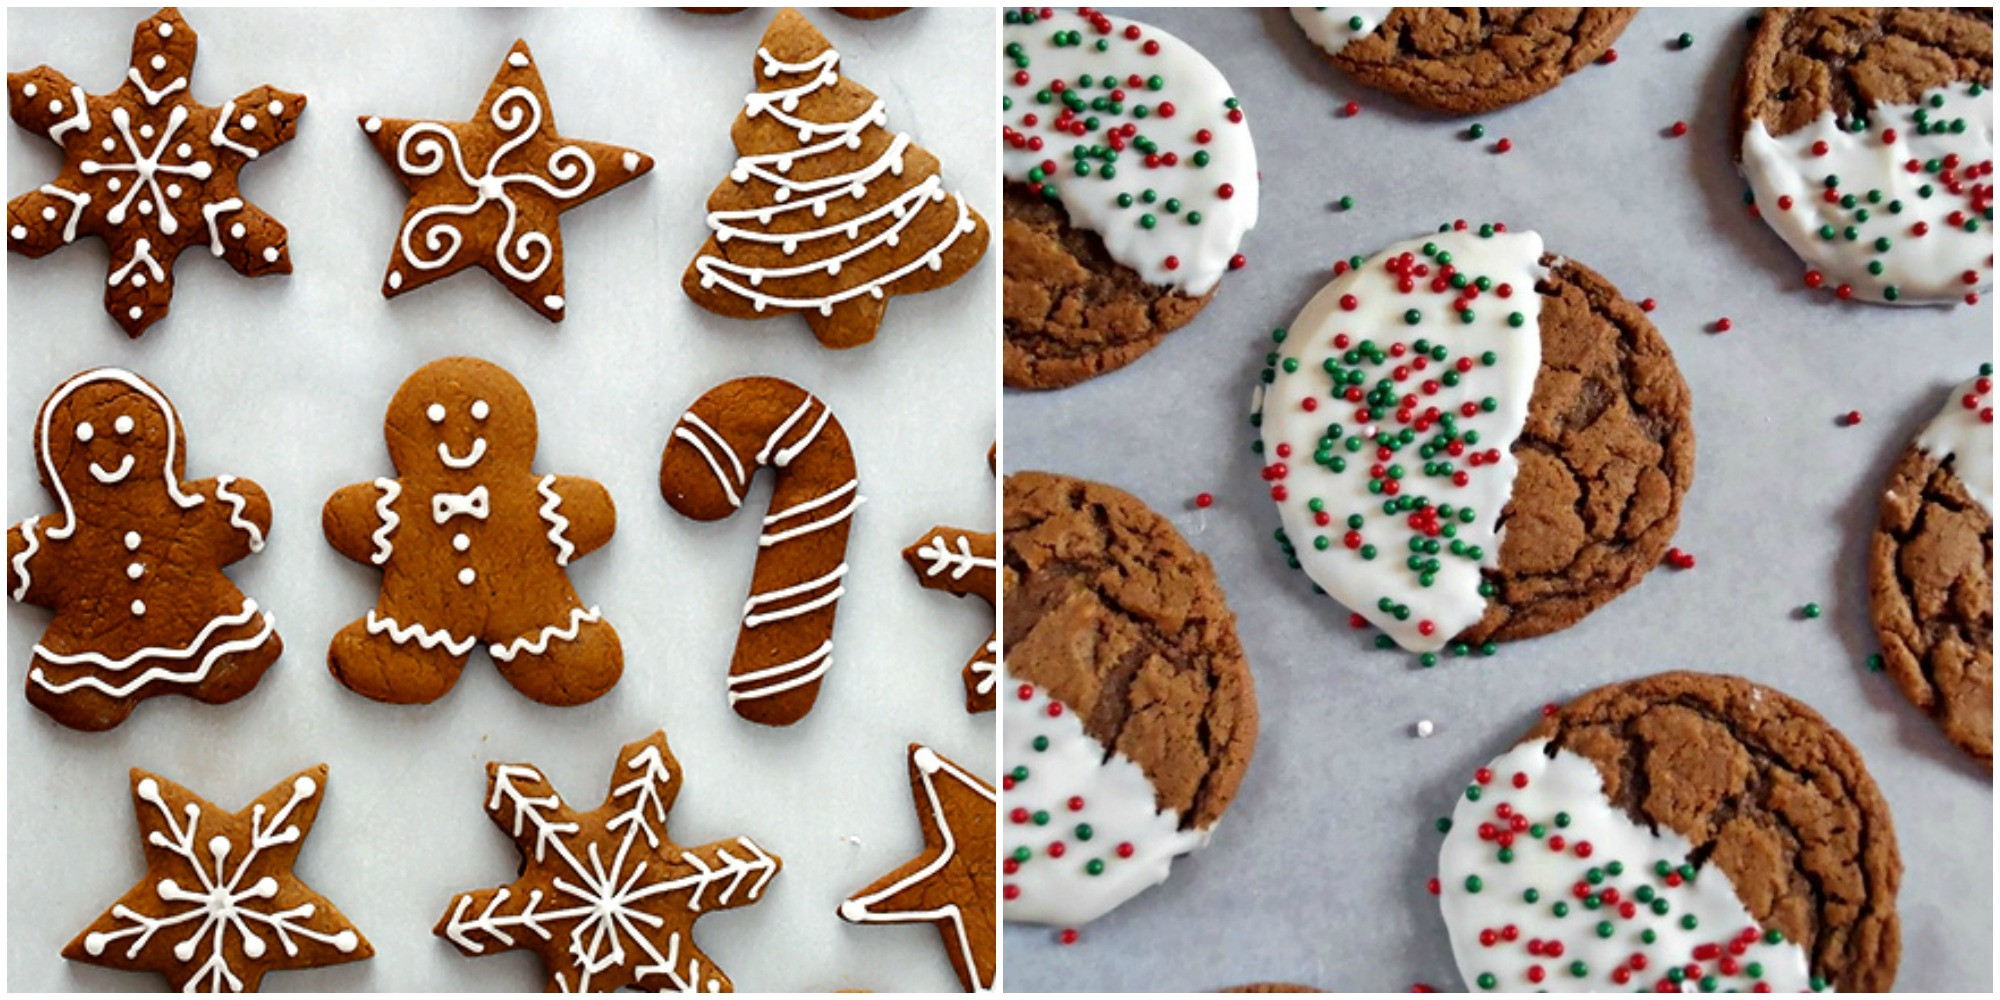 Good Housekeeping Christmas Cookies
 24 Easy Gingerbread Cookie Recipes How to Make Homemade